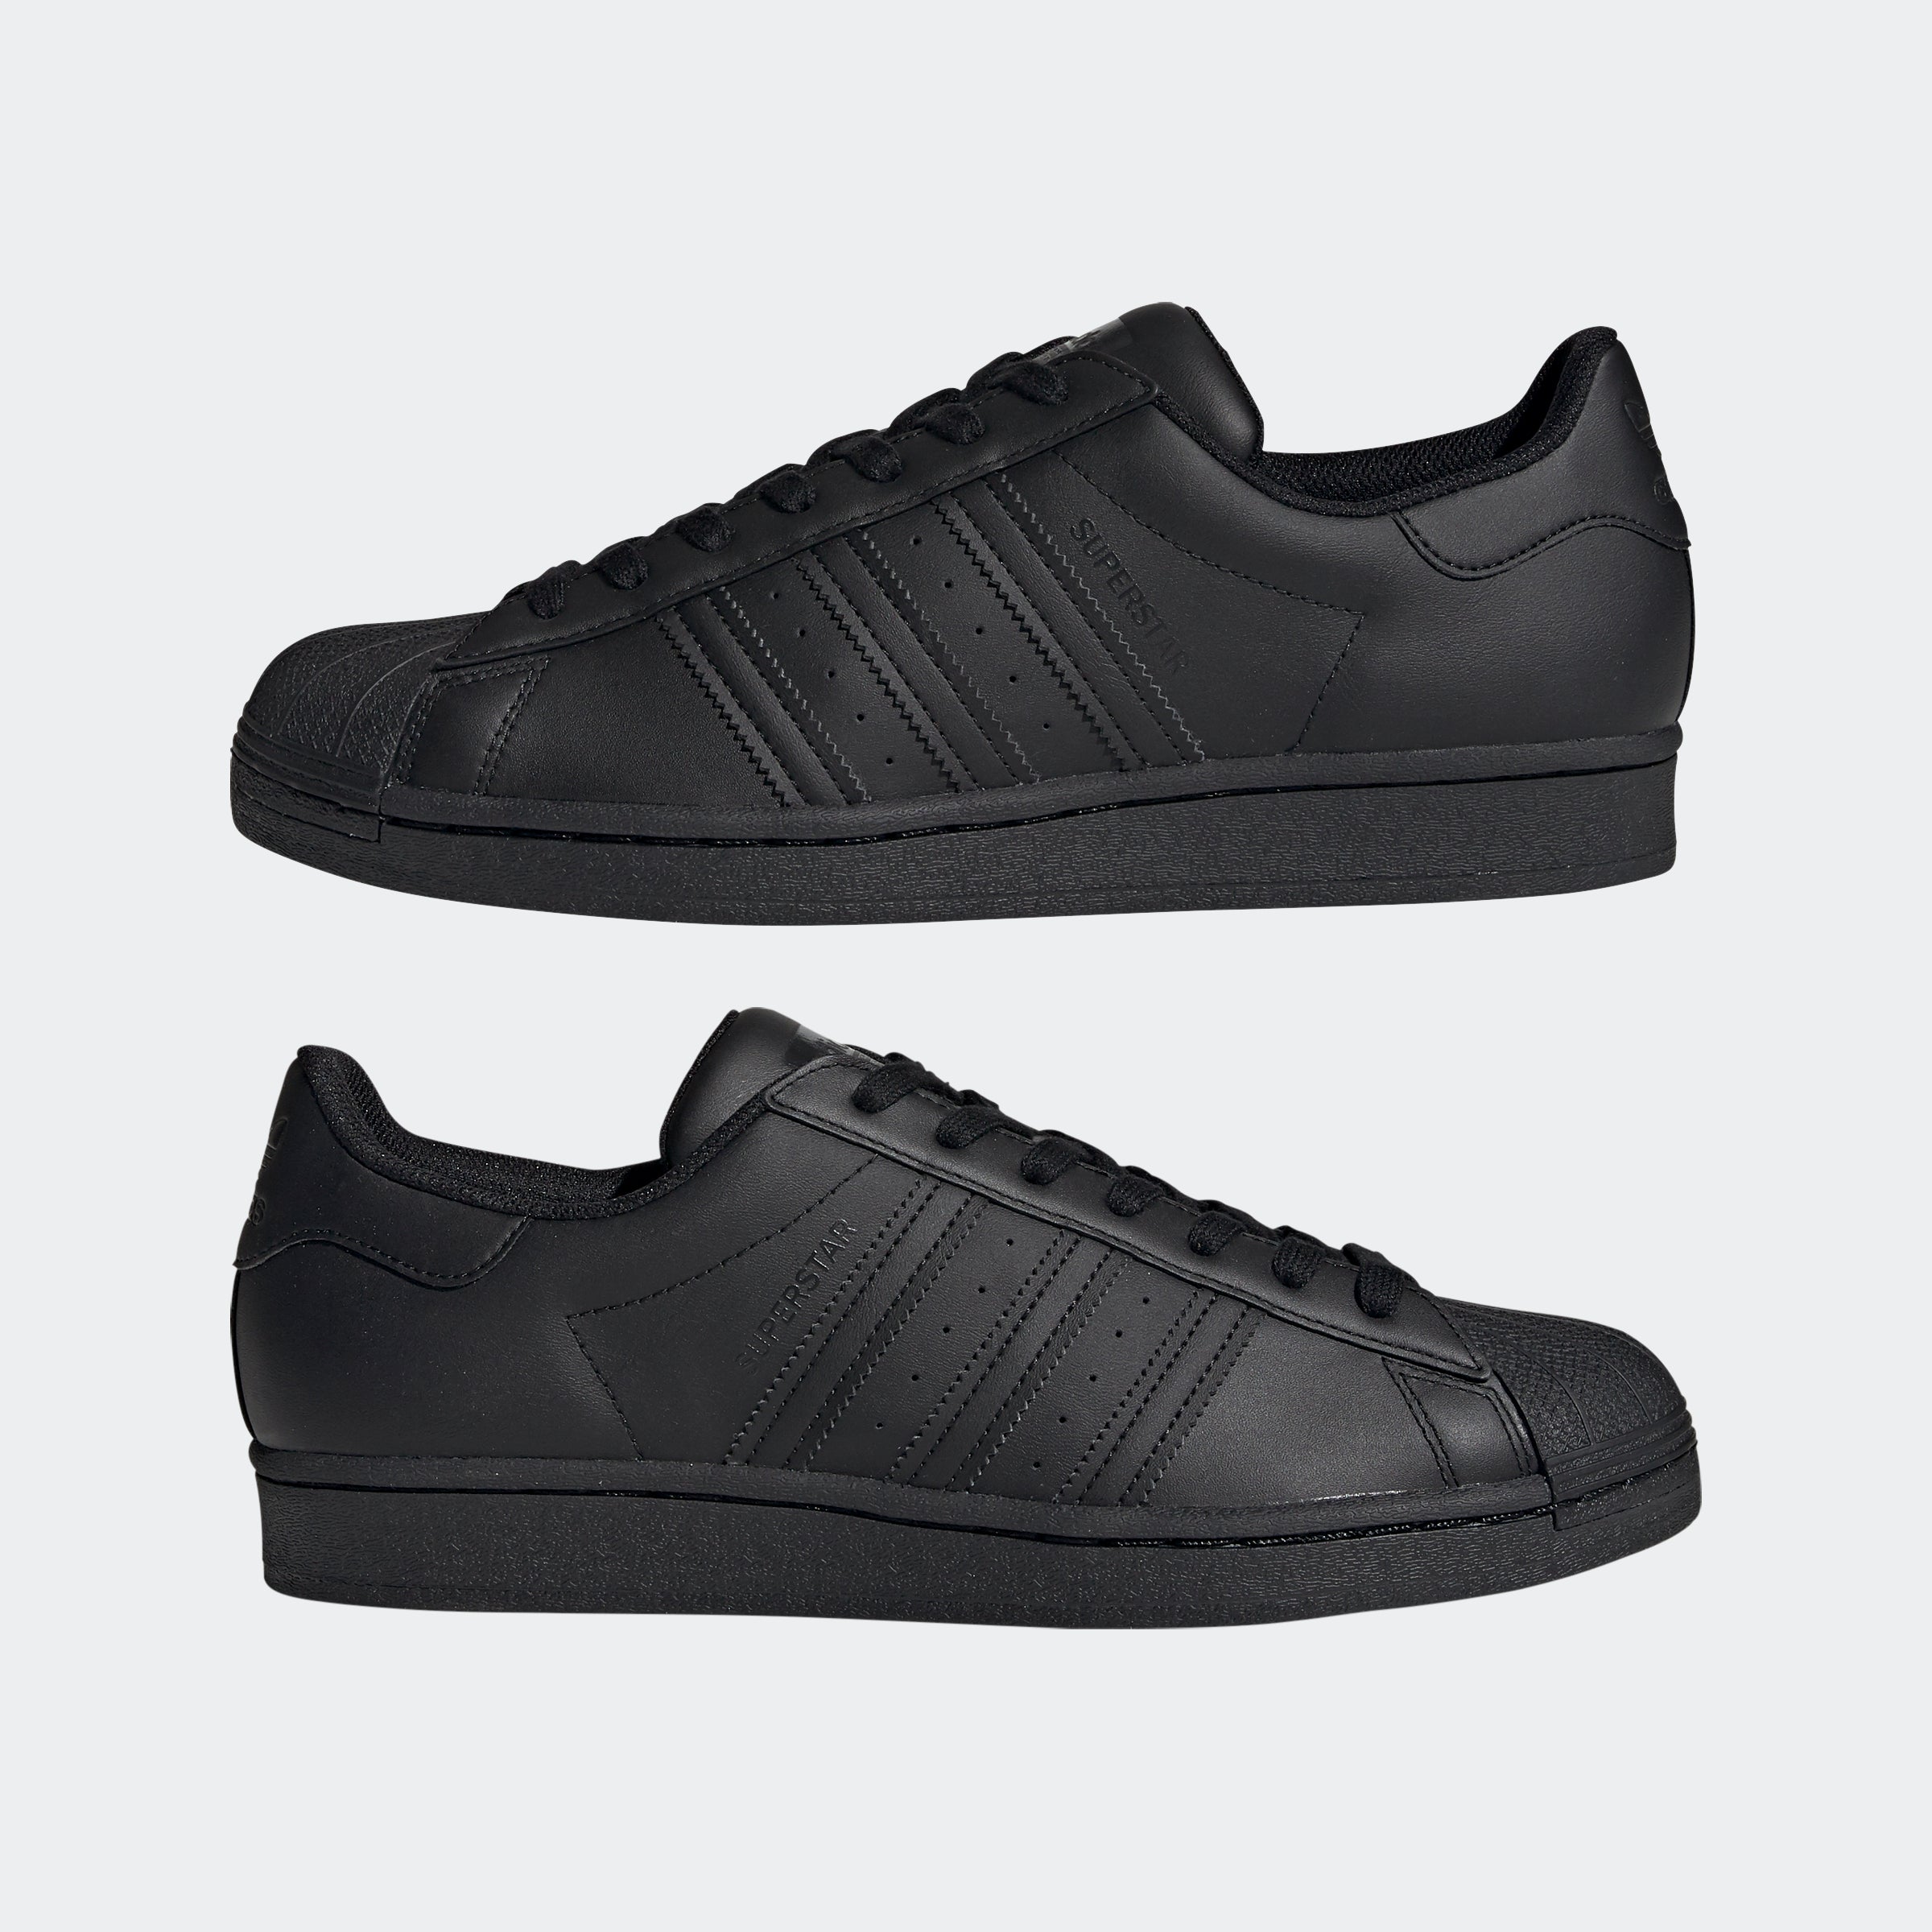 adidas superstar mens outfit style fashion - Google Search  Adidas  superstar outfit, Adidas superstar mens, Superstar outfit